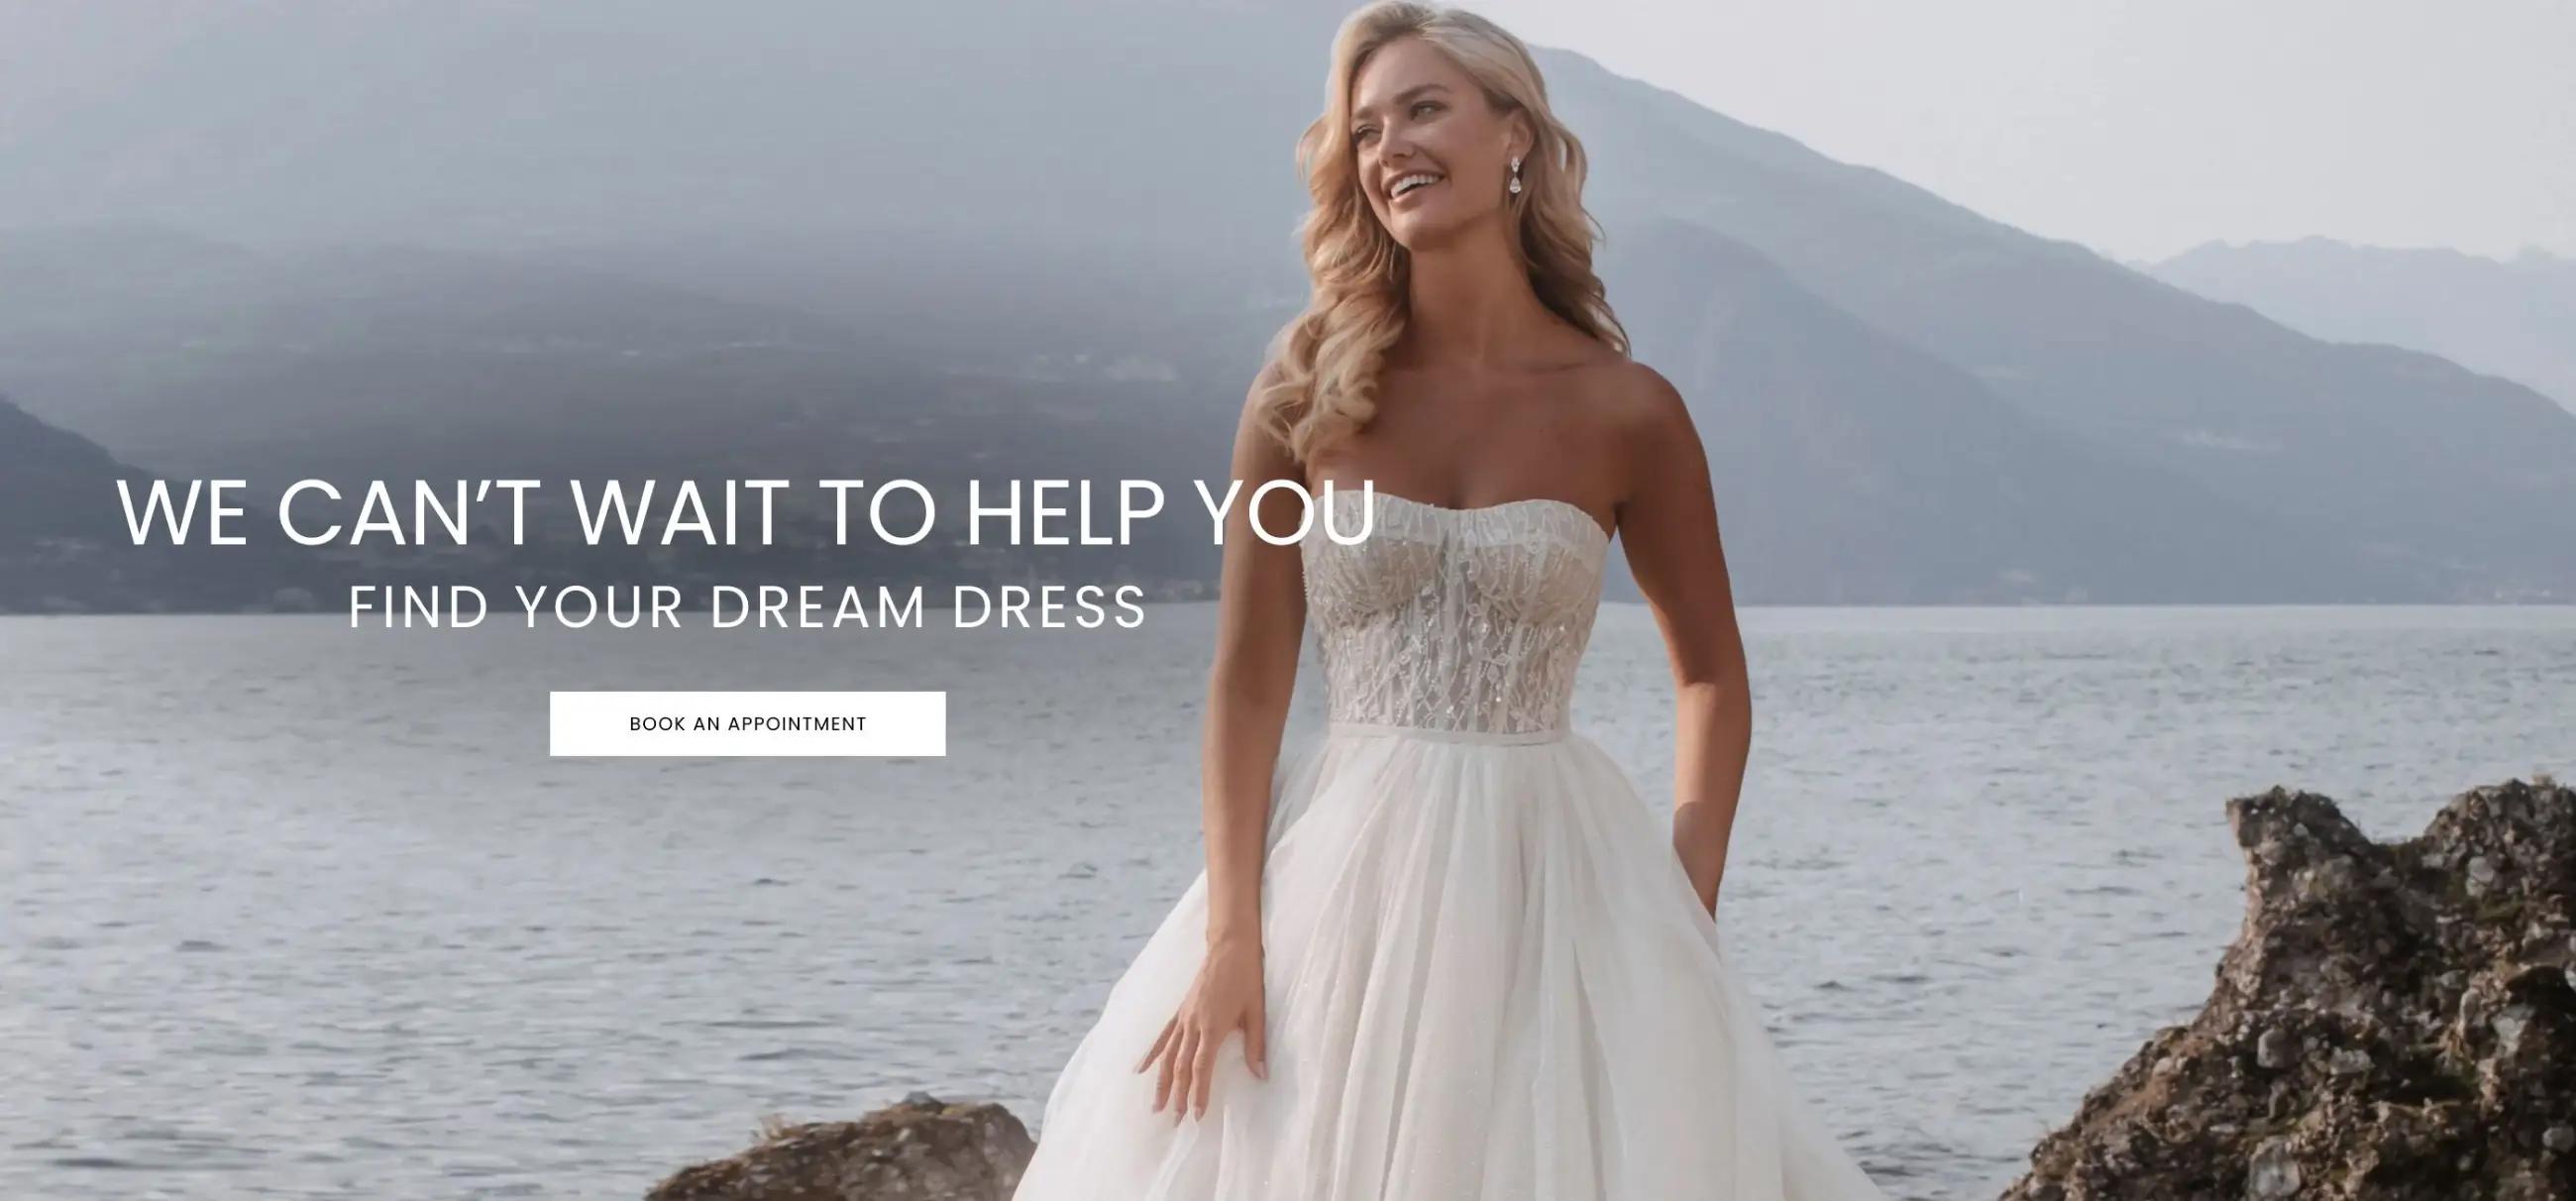 Desktop We Can't Wait To Help You Find Your Dream Dress Banner